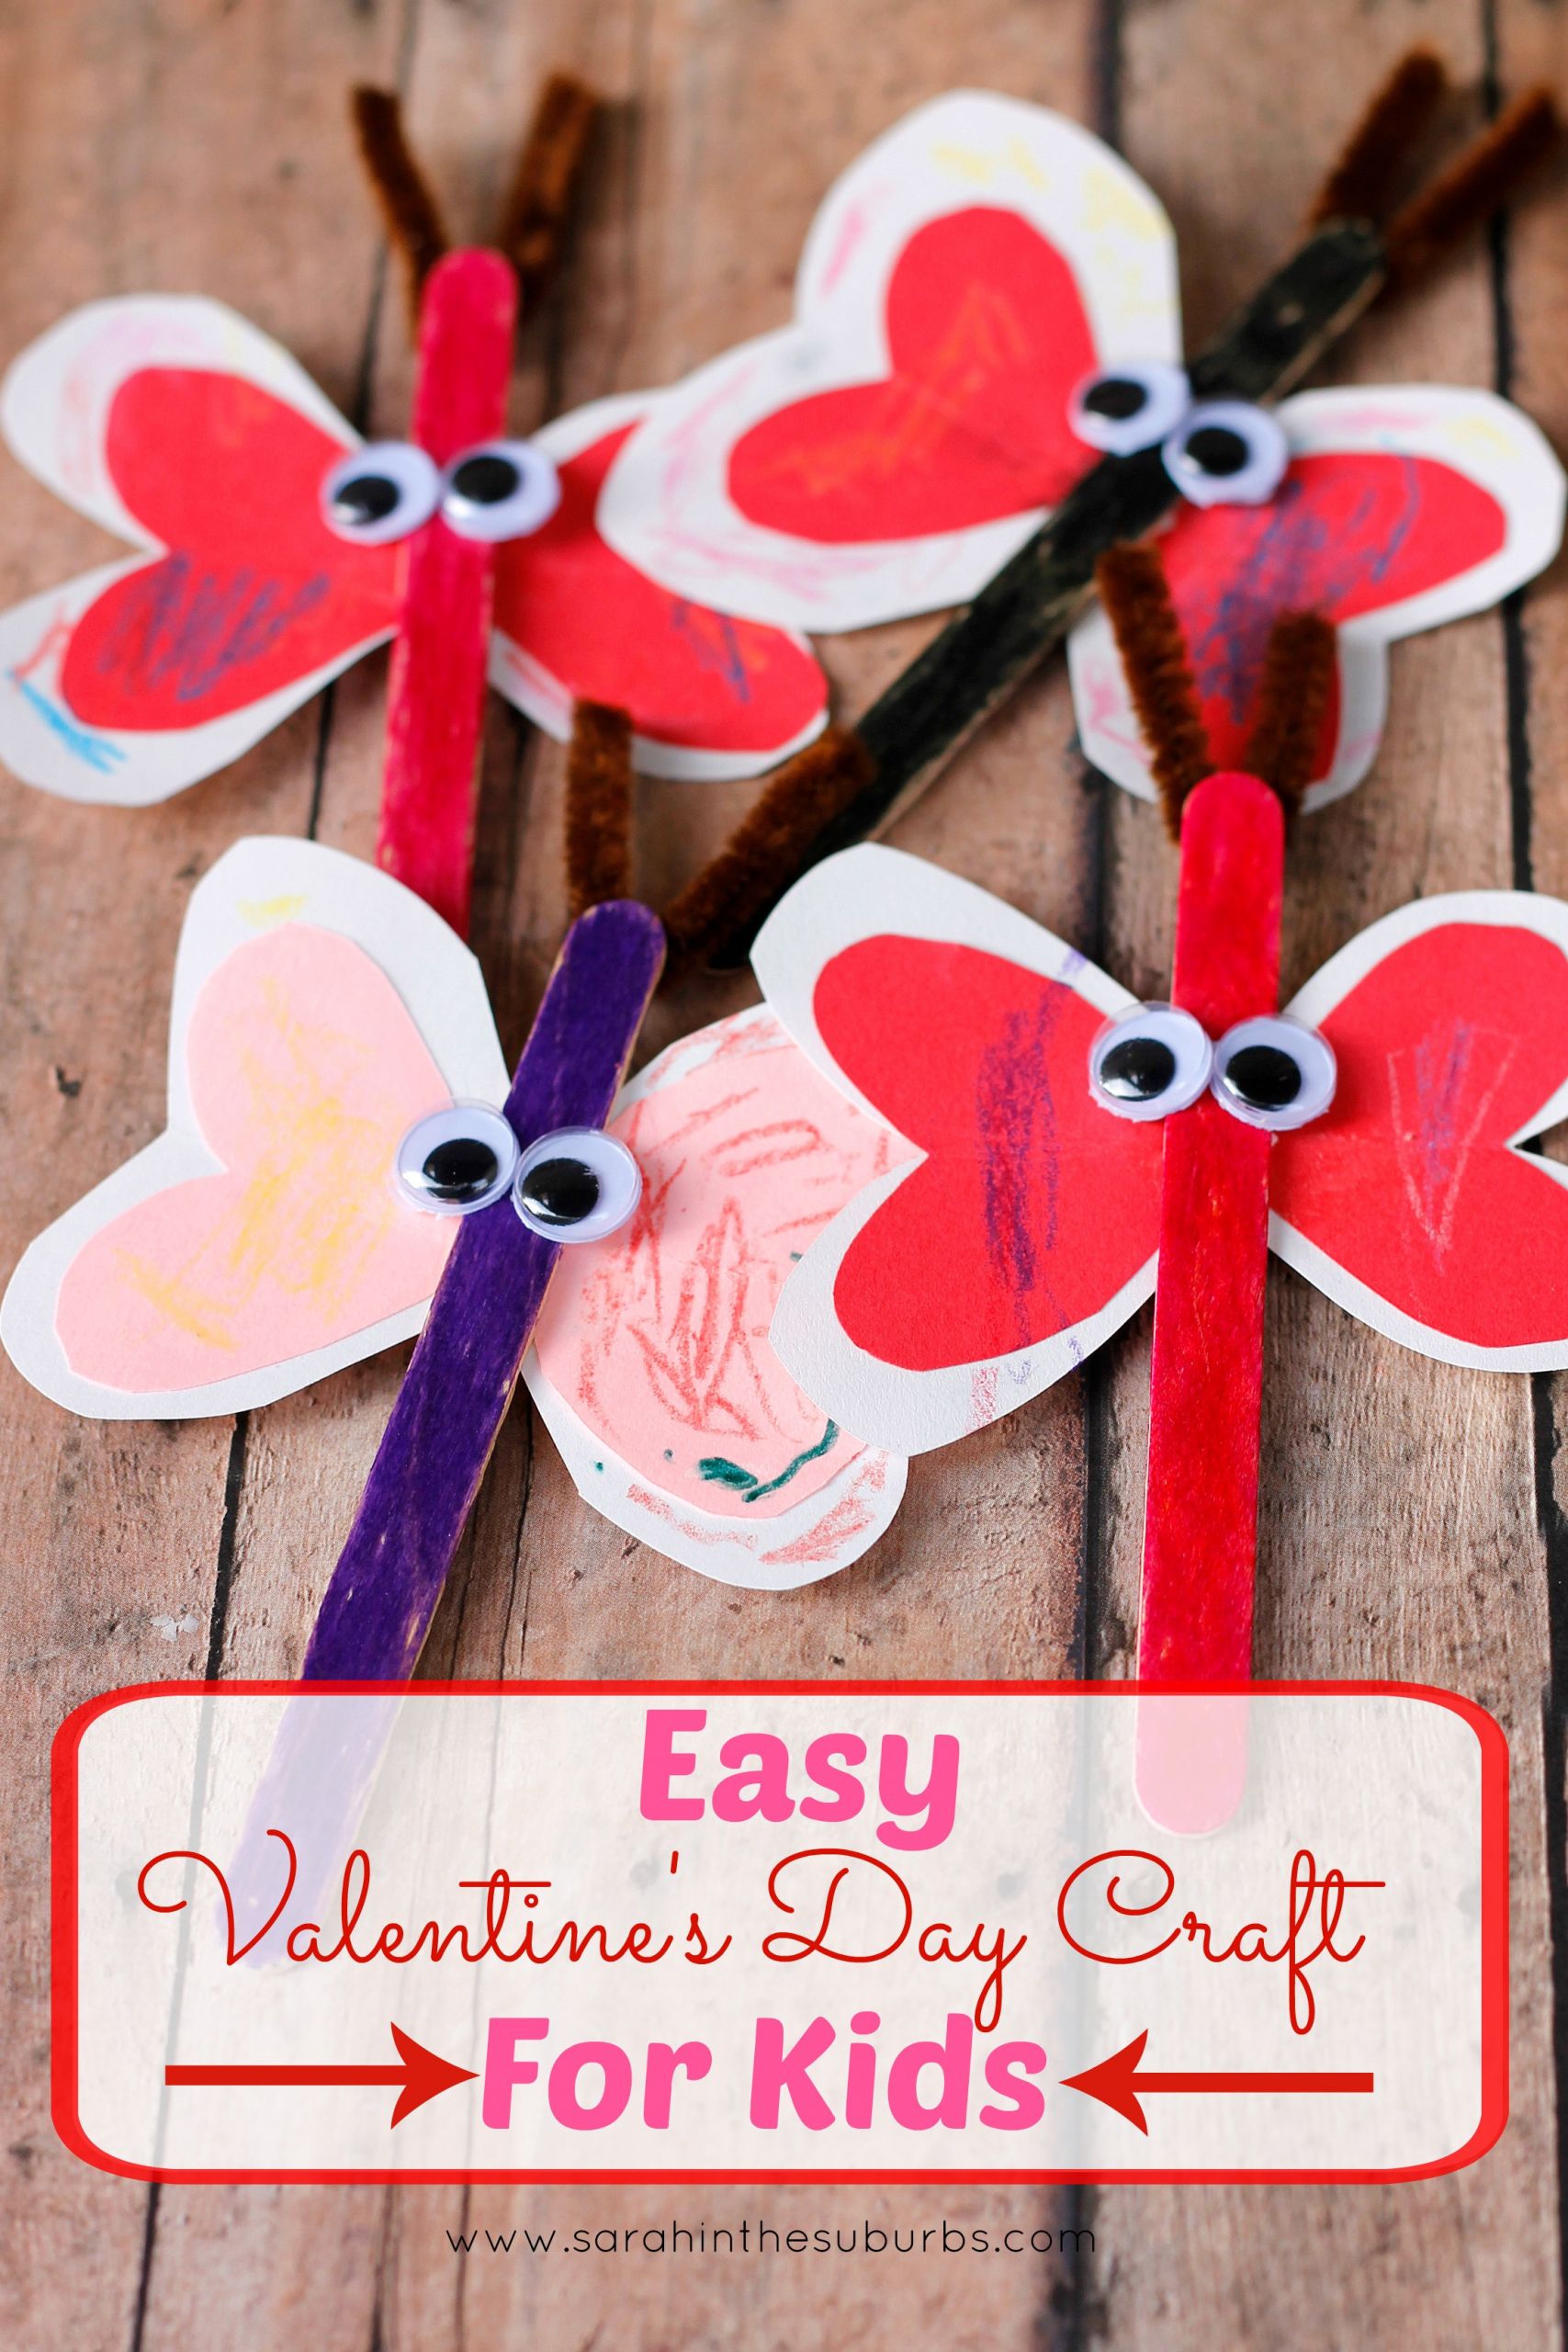 Valentine'S Day Craft Ideas For Toddlers
 Love Bug Valentine s Day Craft for Kids Sarah in the Suburbs